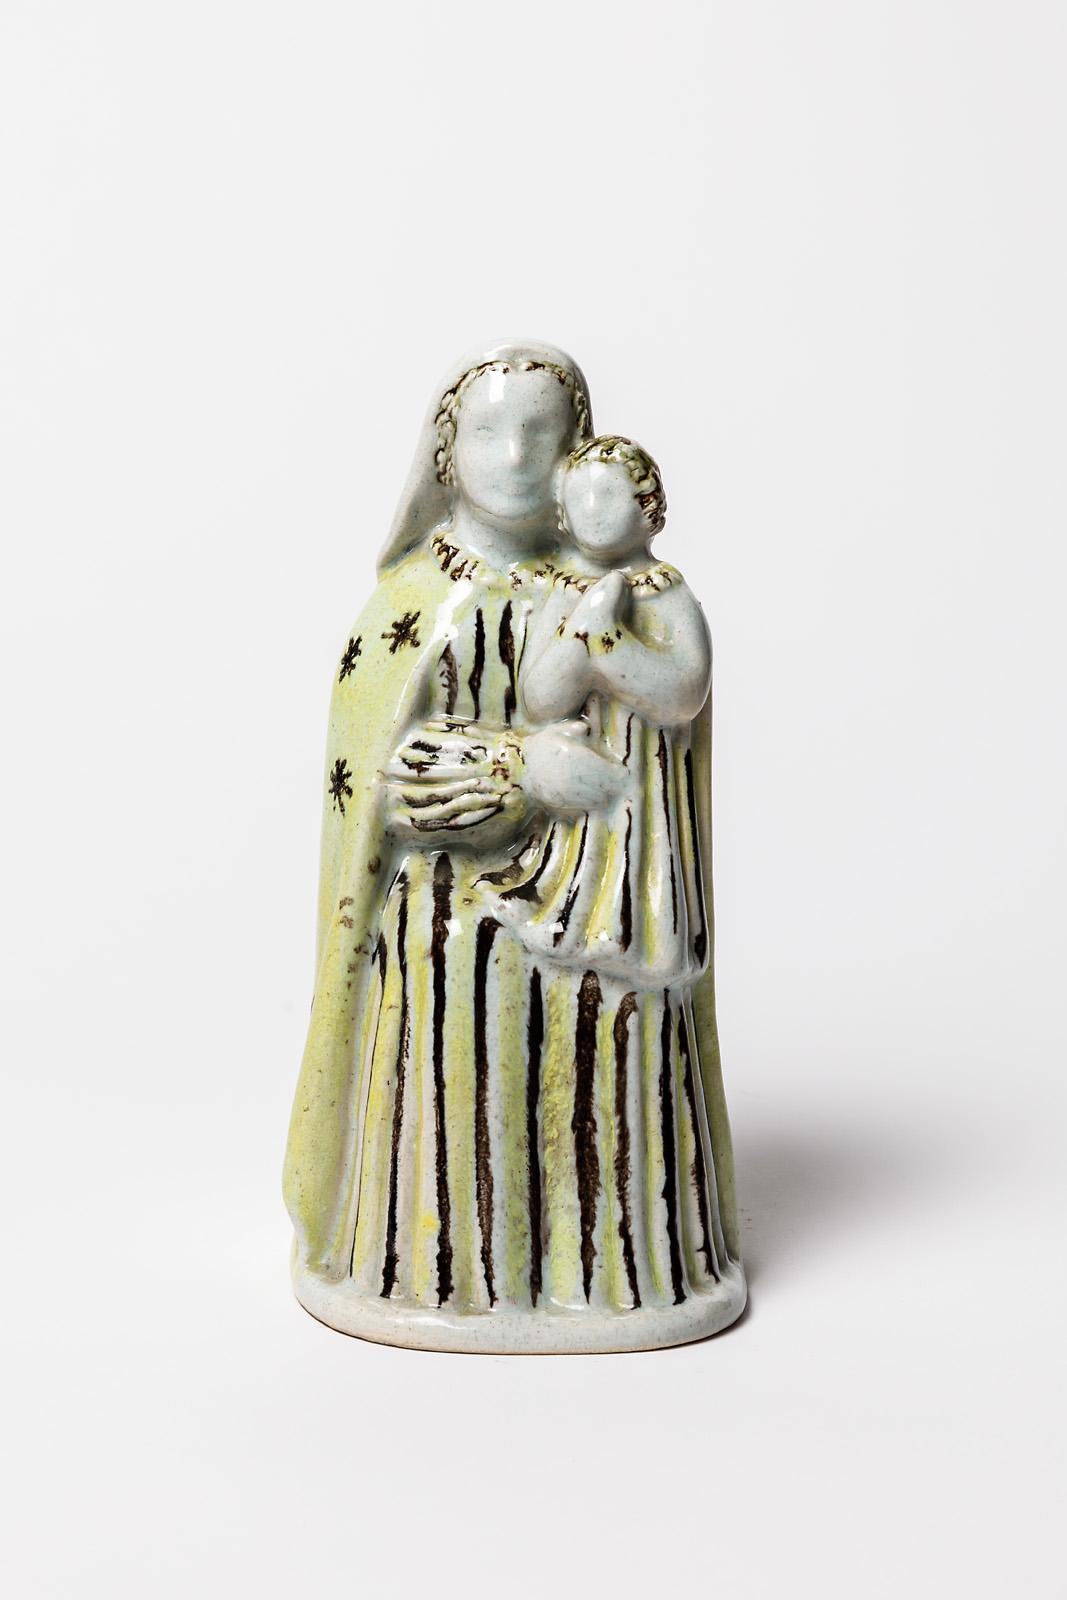 Attributed to Paul pouchol

Art deco ceramic sculpture woman and child

Signed under the base

White , yellow and black ceramic glazes colors

Original perfect condition

Height 21 cm
Large 11 cm.